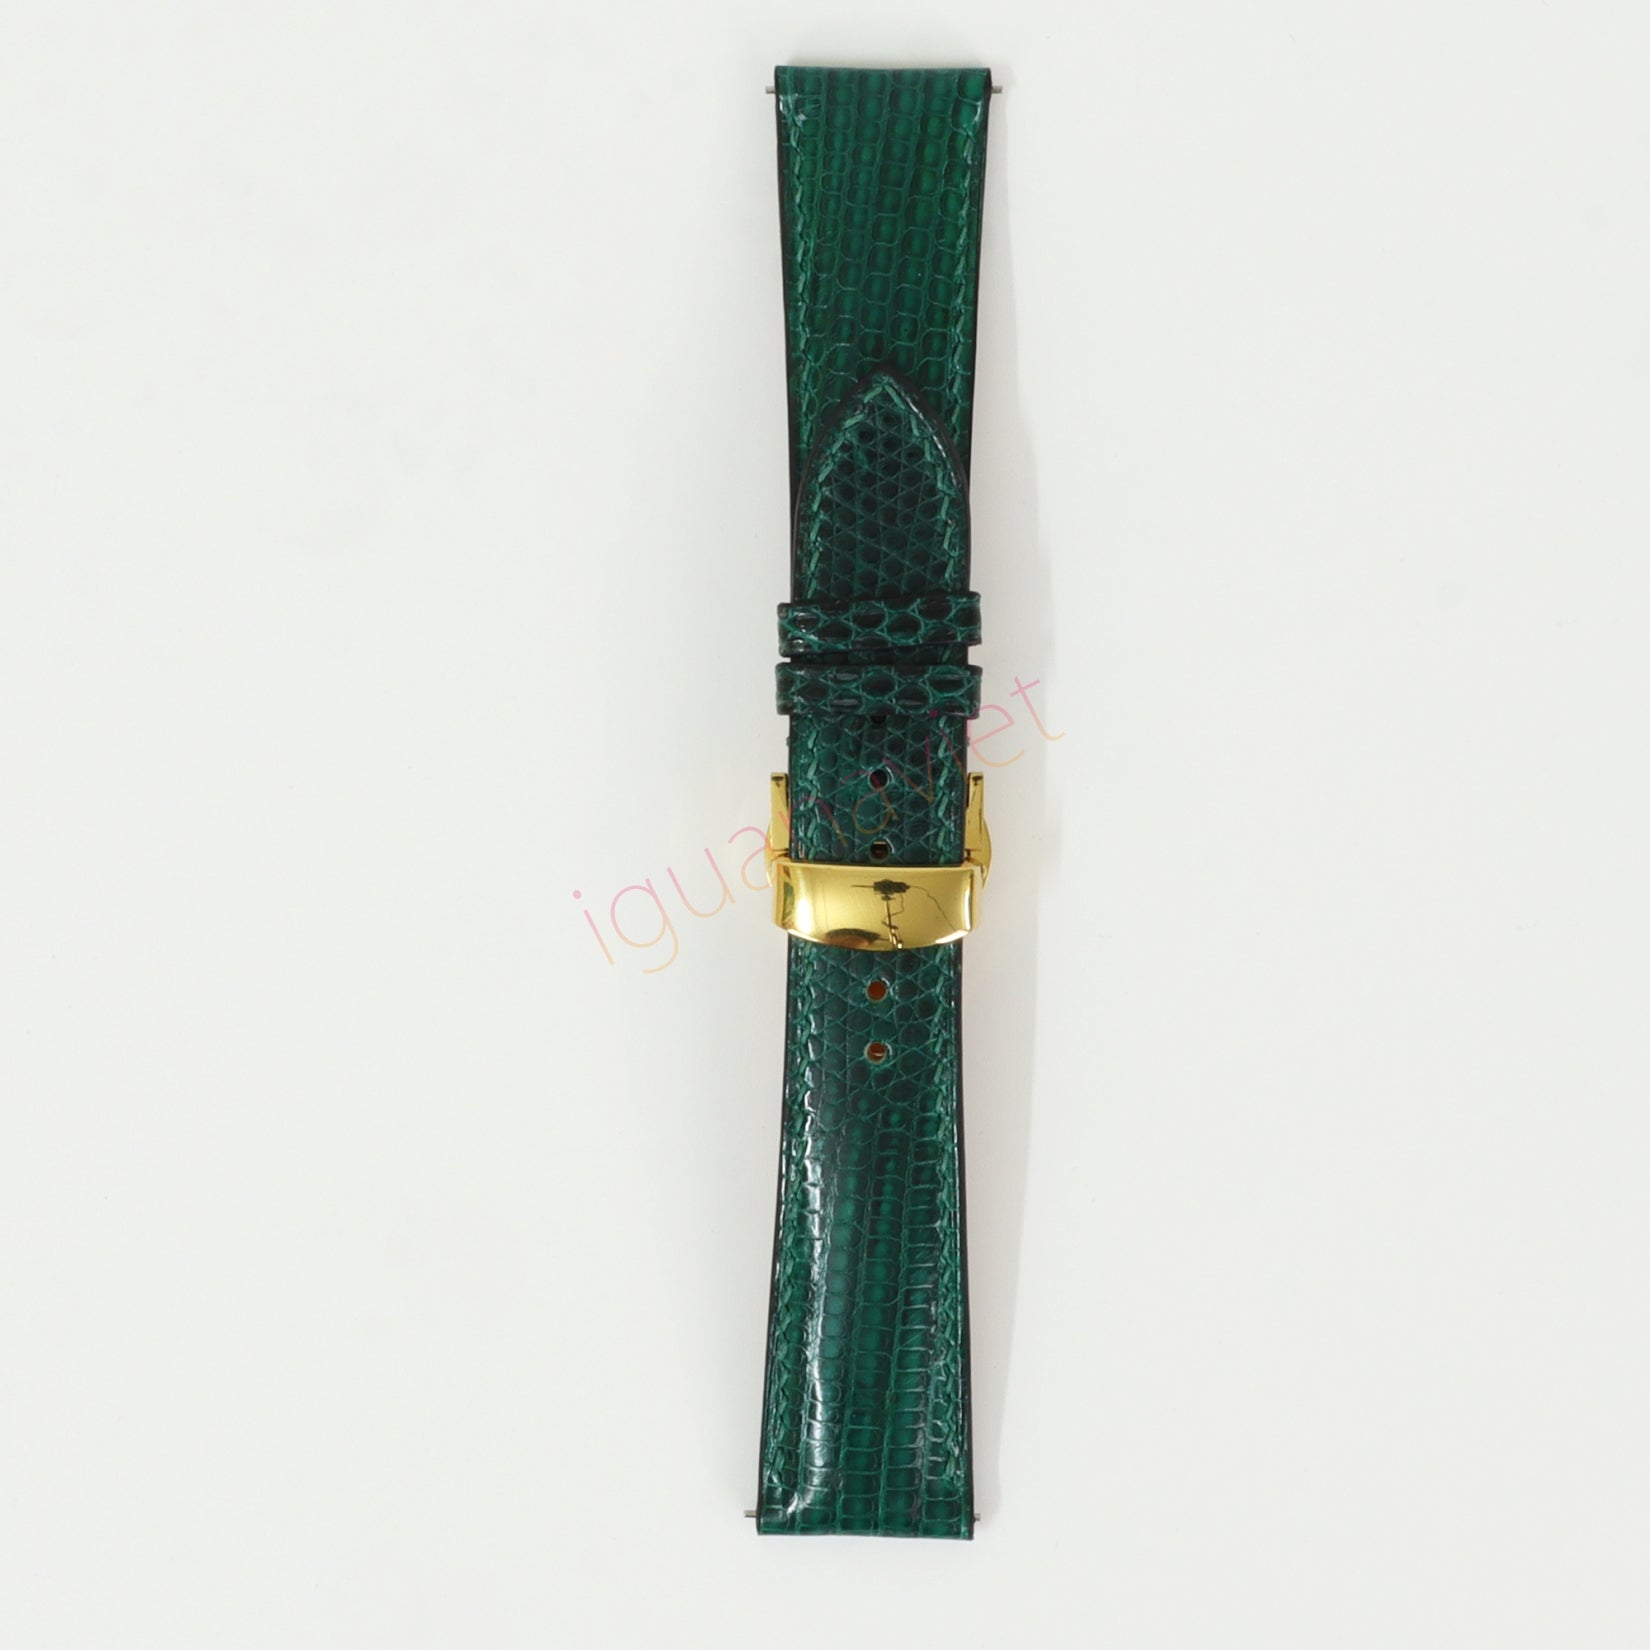 Genuine iguana leather watch strap with deployment buckle, quick release pin leather watch strap, handmade leather watch strap